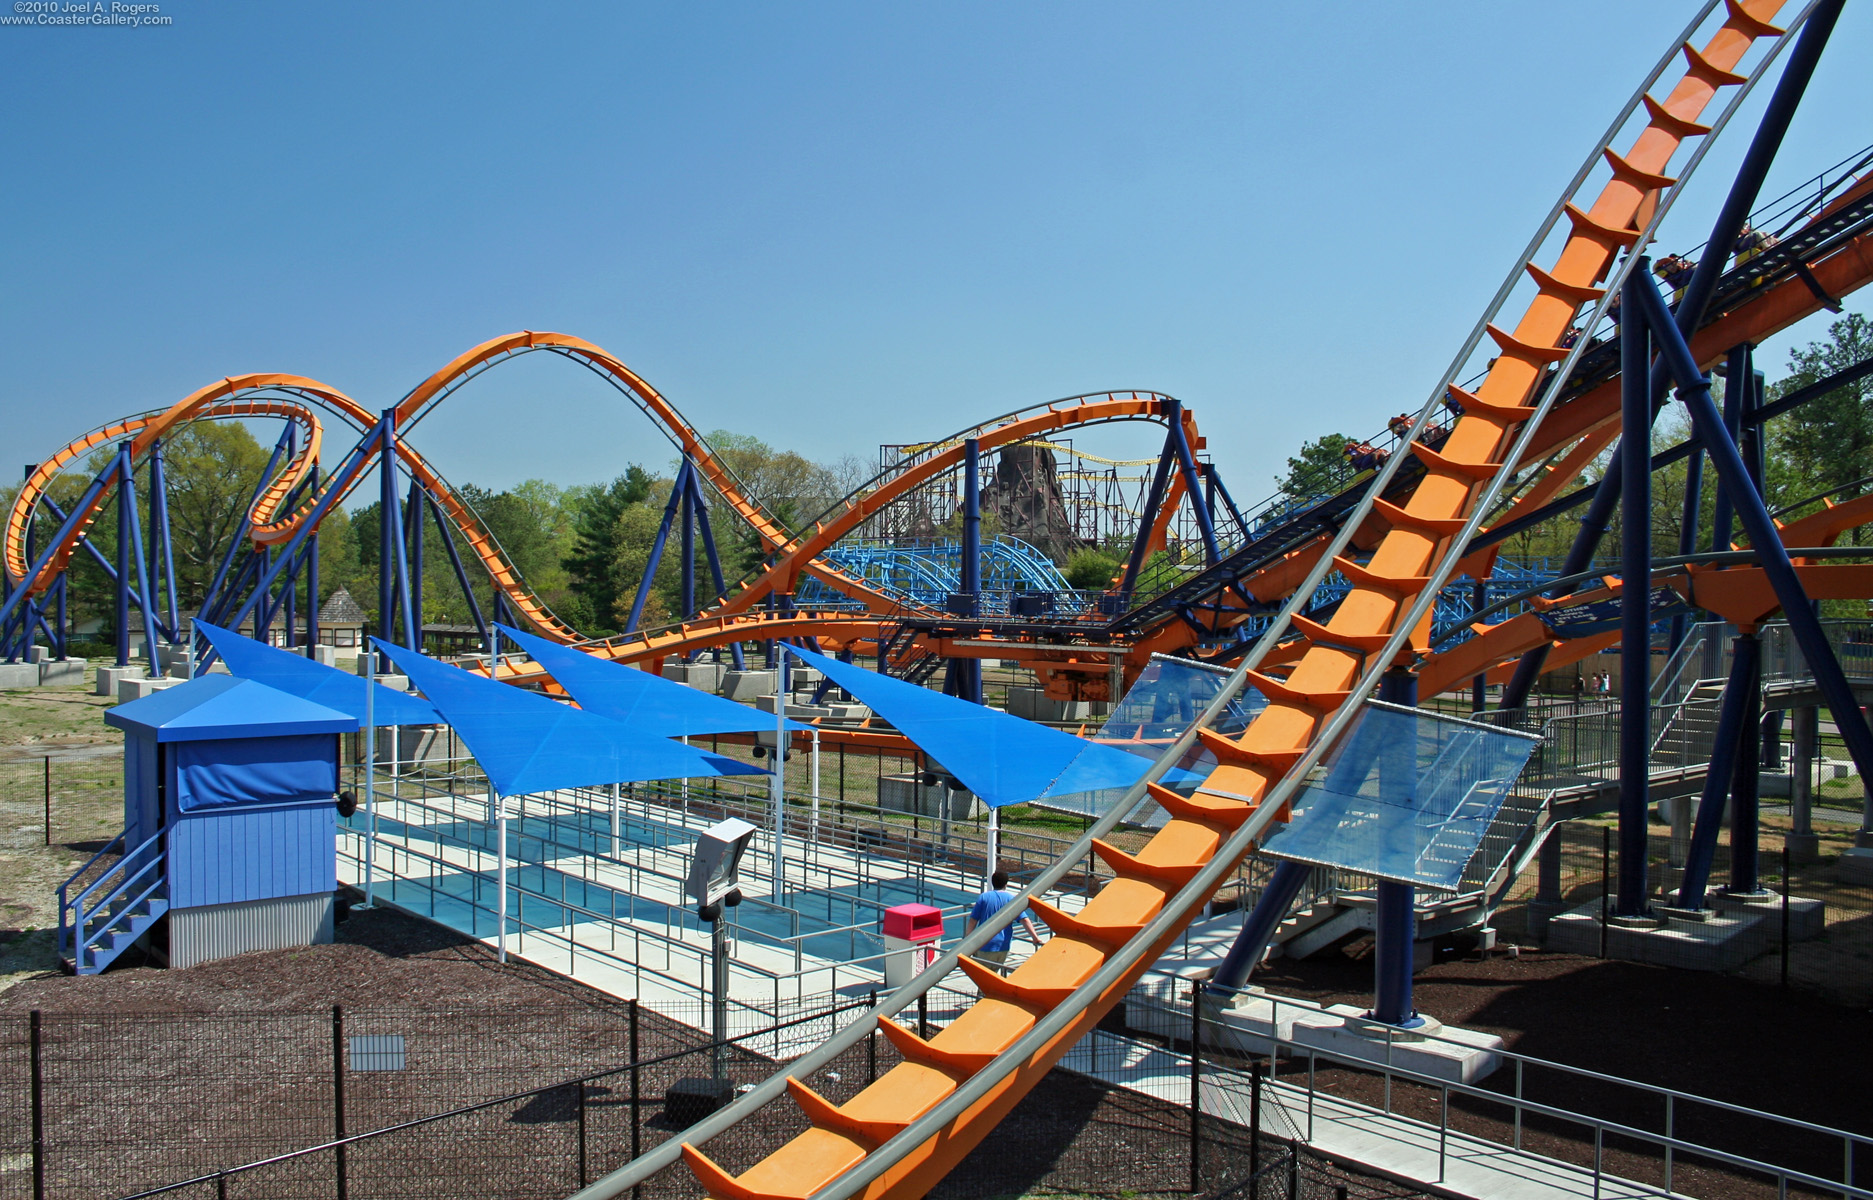 A floorless coaster, a wooden coaster, and an inverted roller coaster